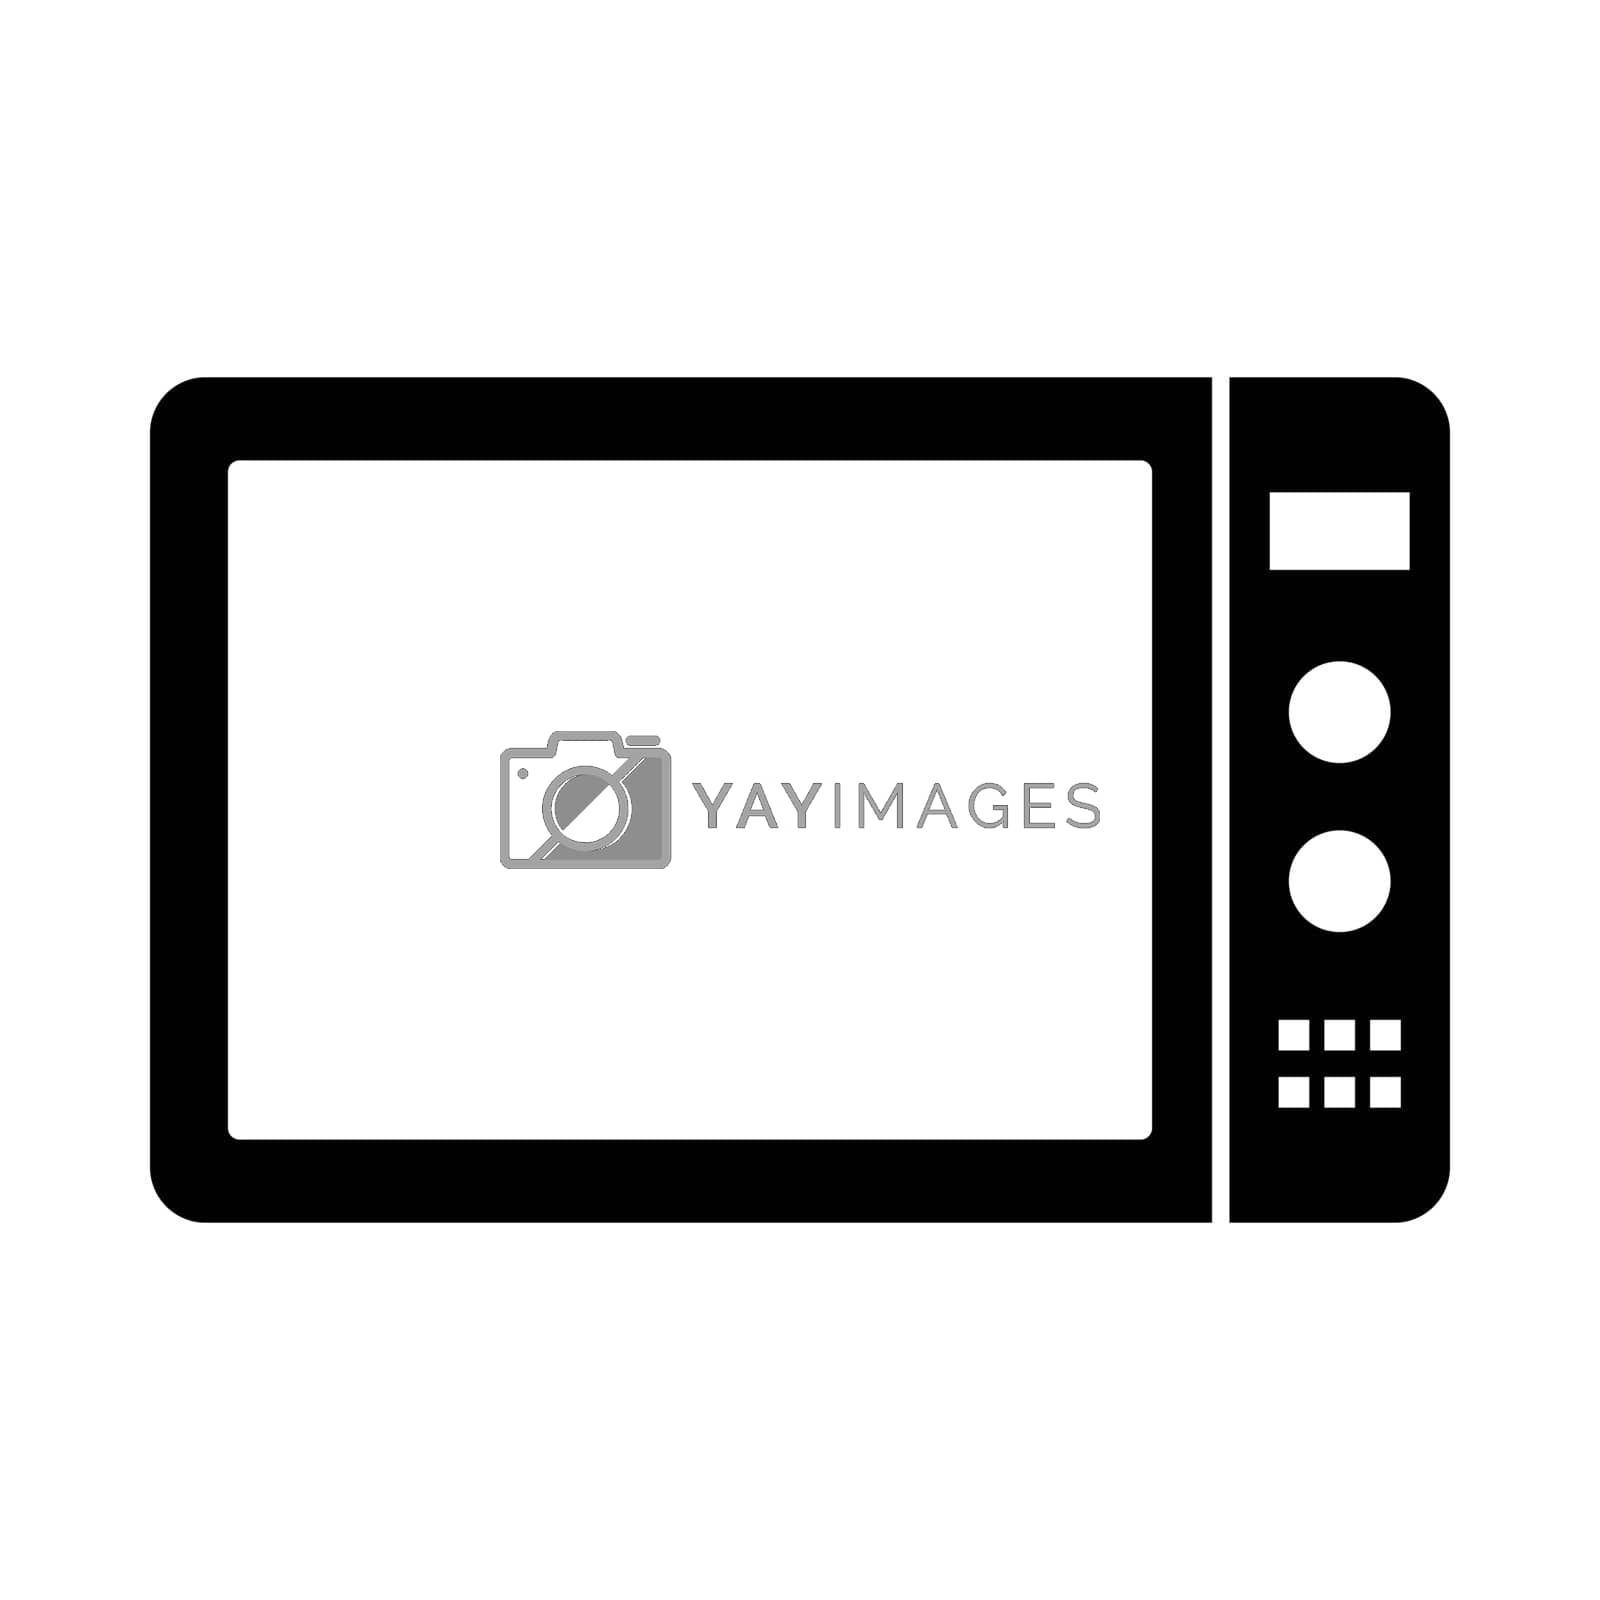 Royalty free image of Microwave Oven icon. Appliance Icon. Vector. by illust_monster